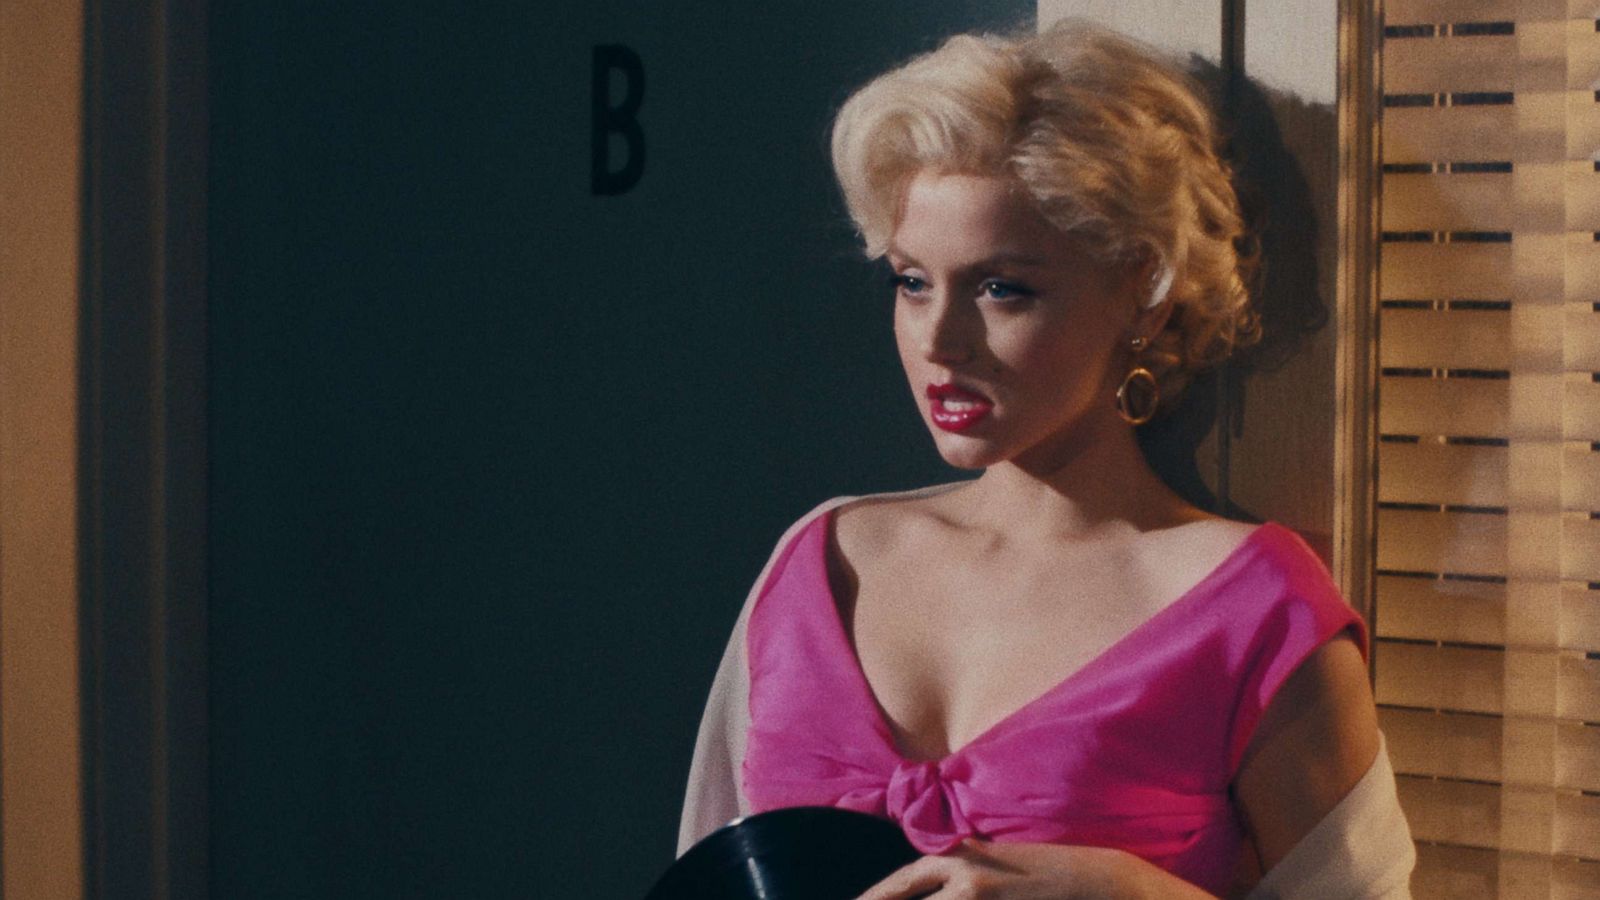 Marilyn Monroe: Why Are We Still Lusting After Her Body Shape?